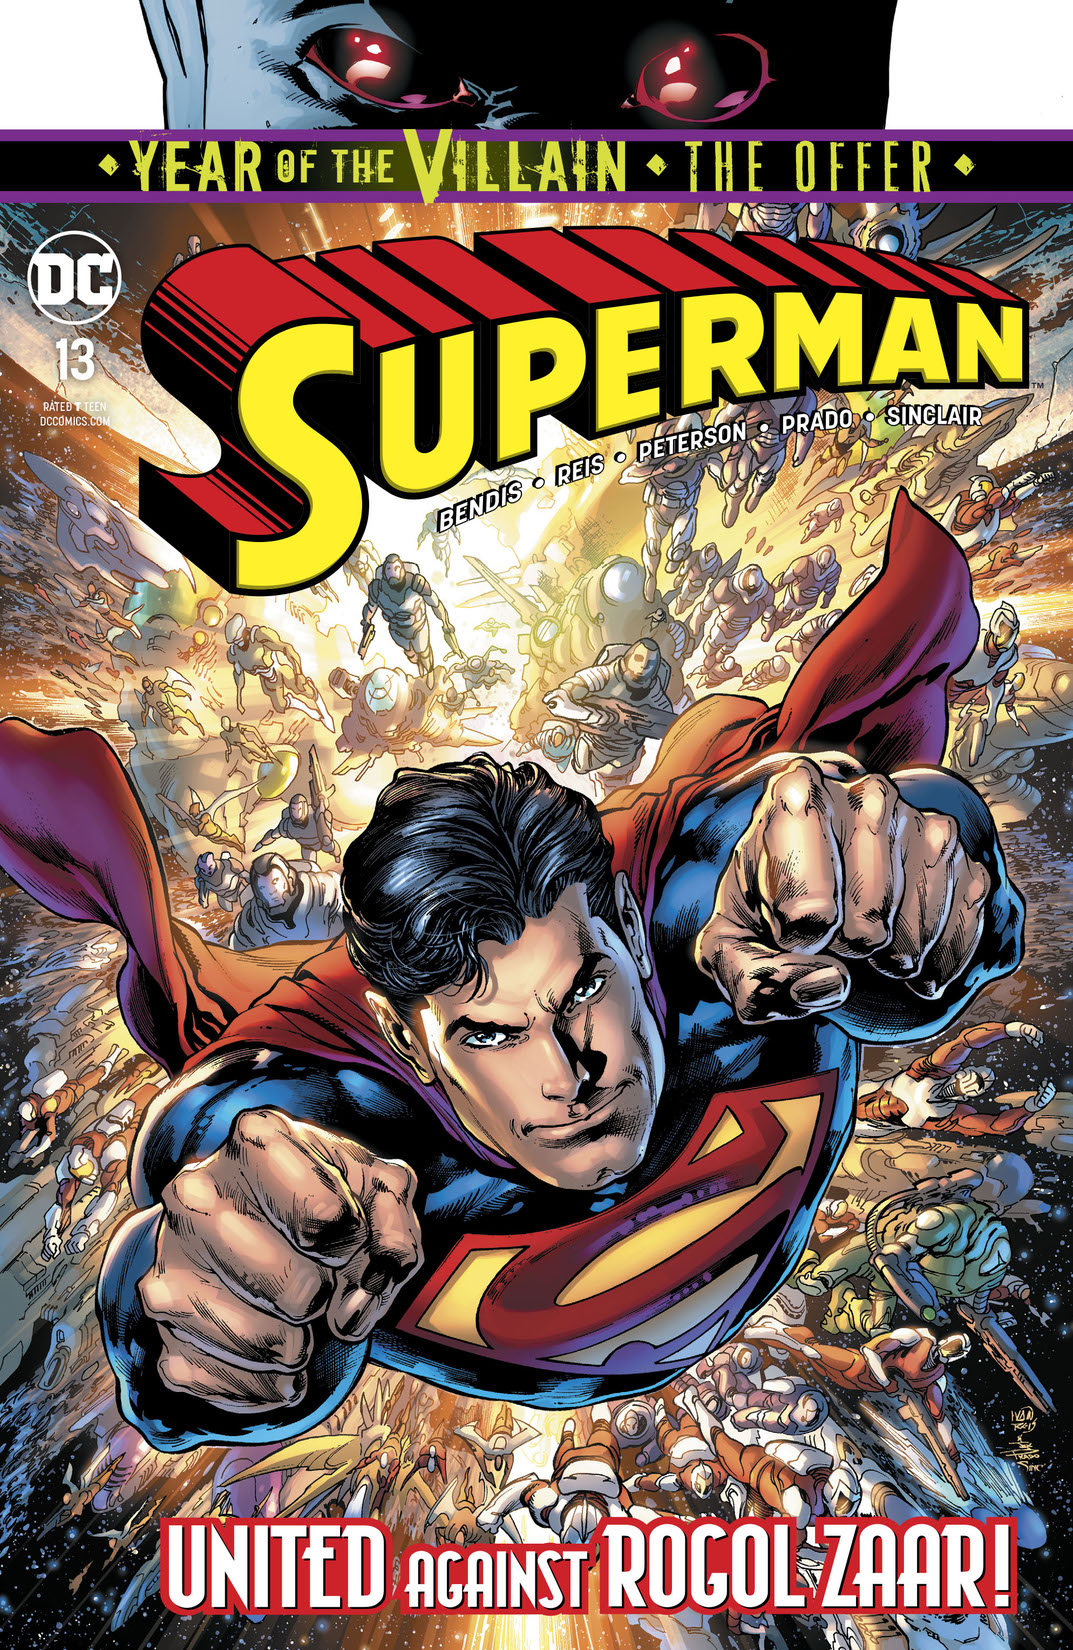 Superman (2018-) #13 preview images